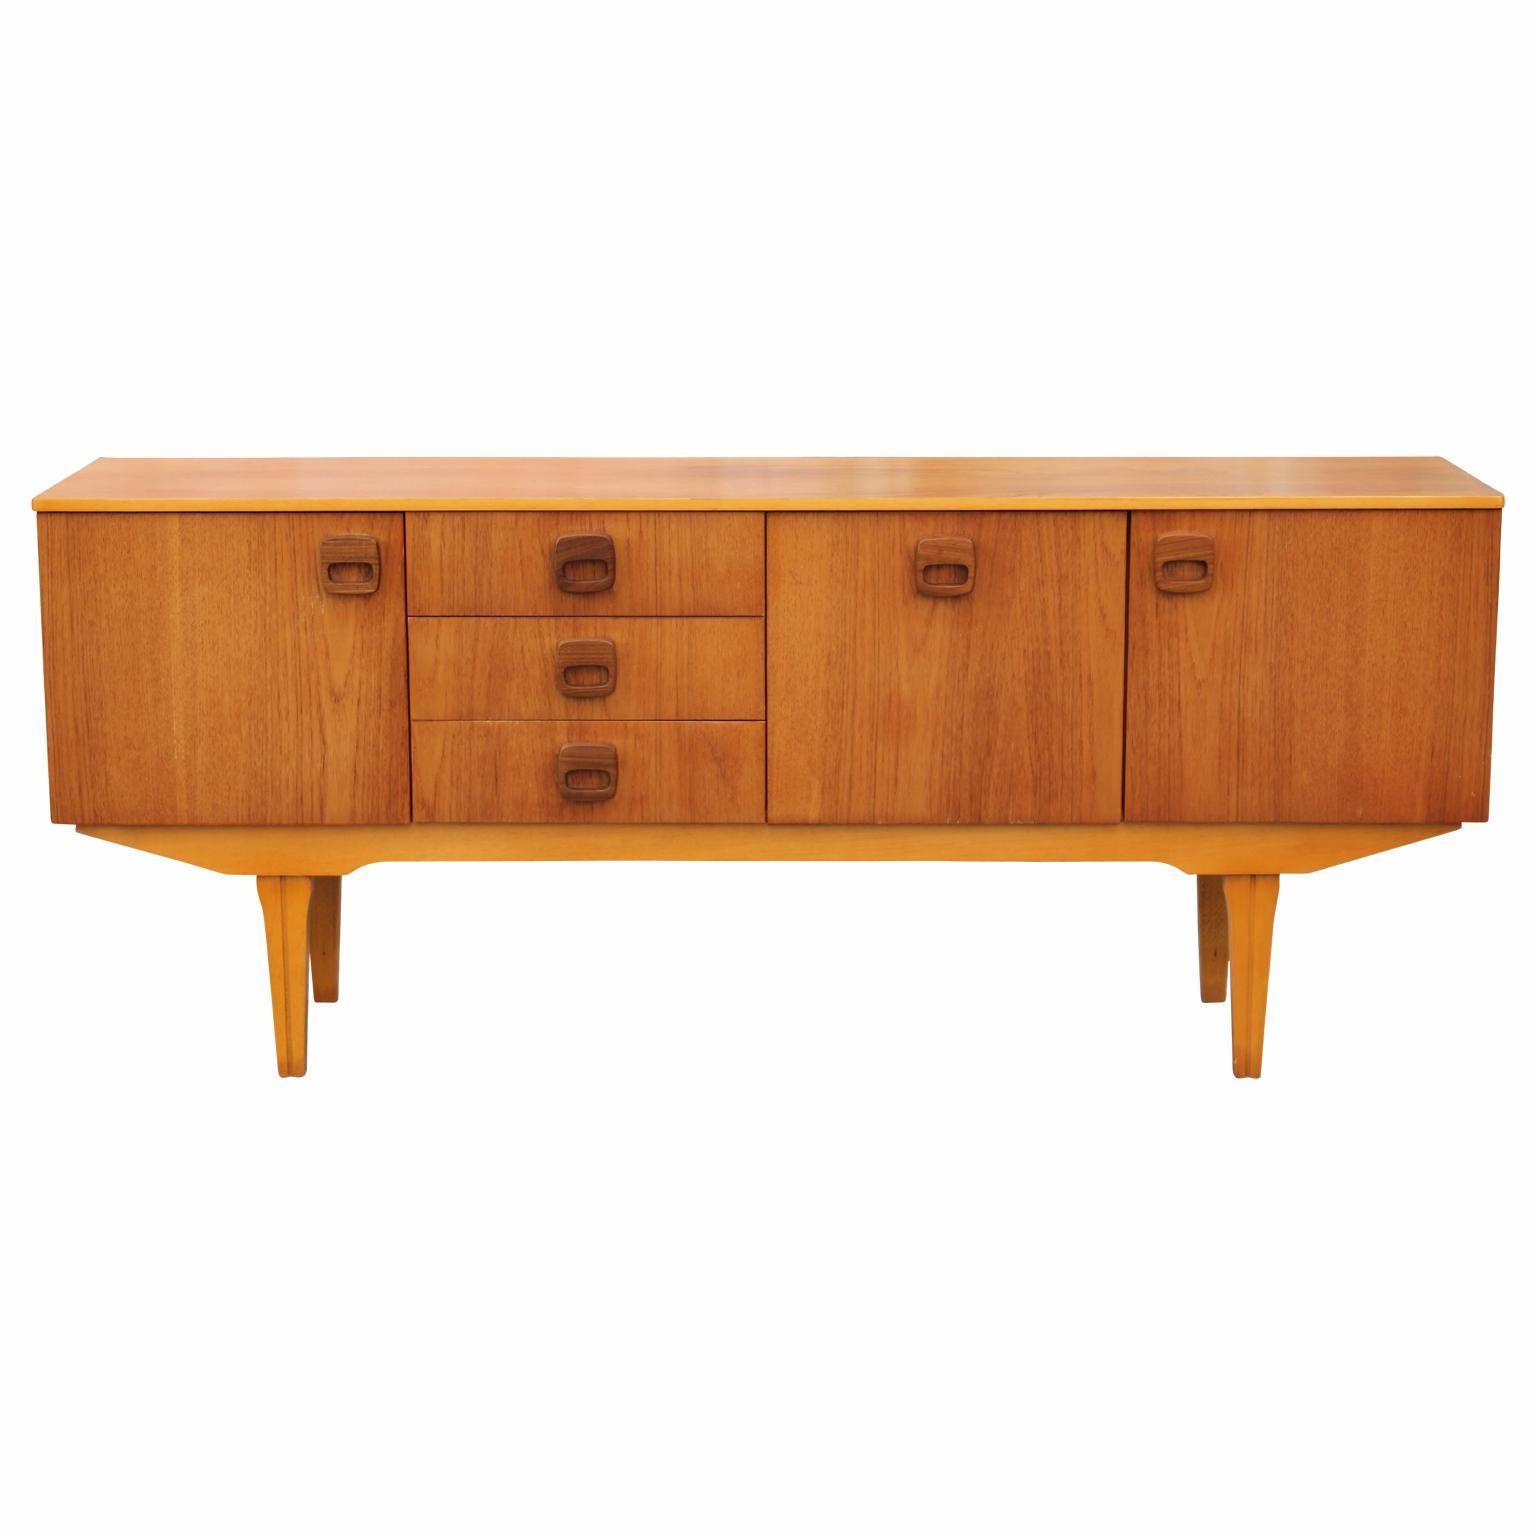 Mid-Century Modern Danish Style Teak Sideboard or Credenza with Wooden Handles